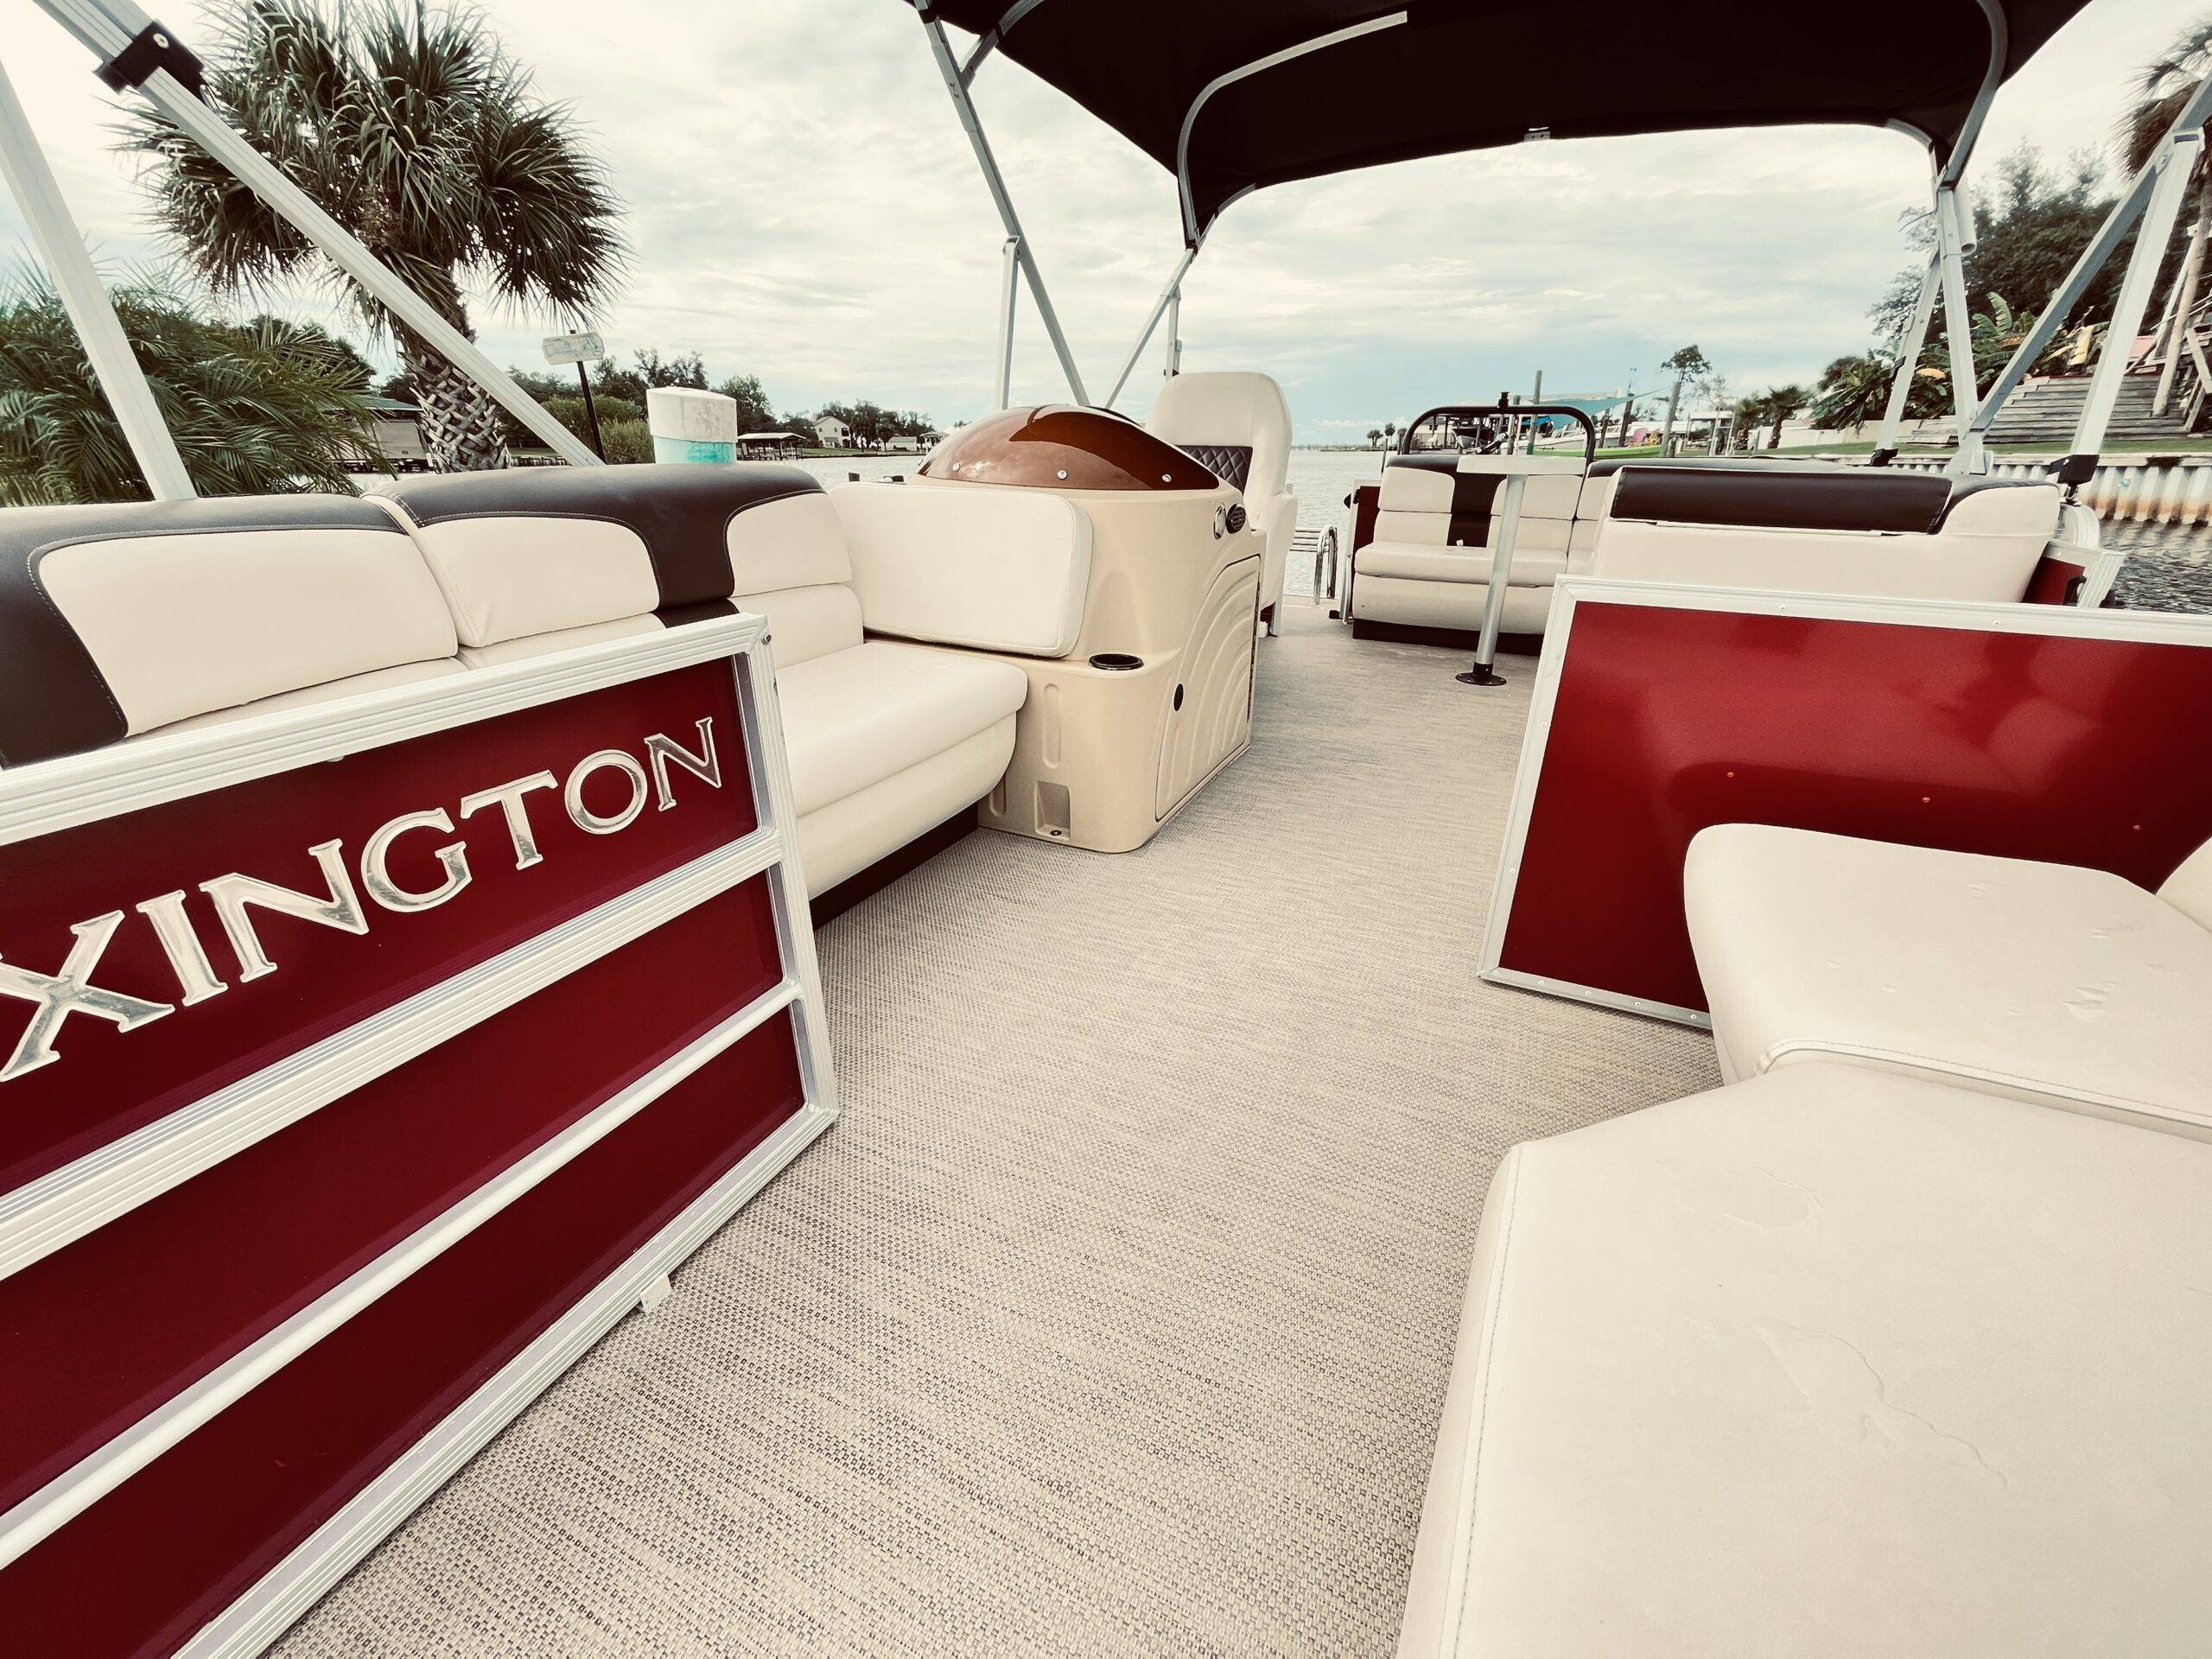 Interior view of a Lexington pontoon boat showcasing spacious seating for boating mastery and leisure.